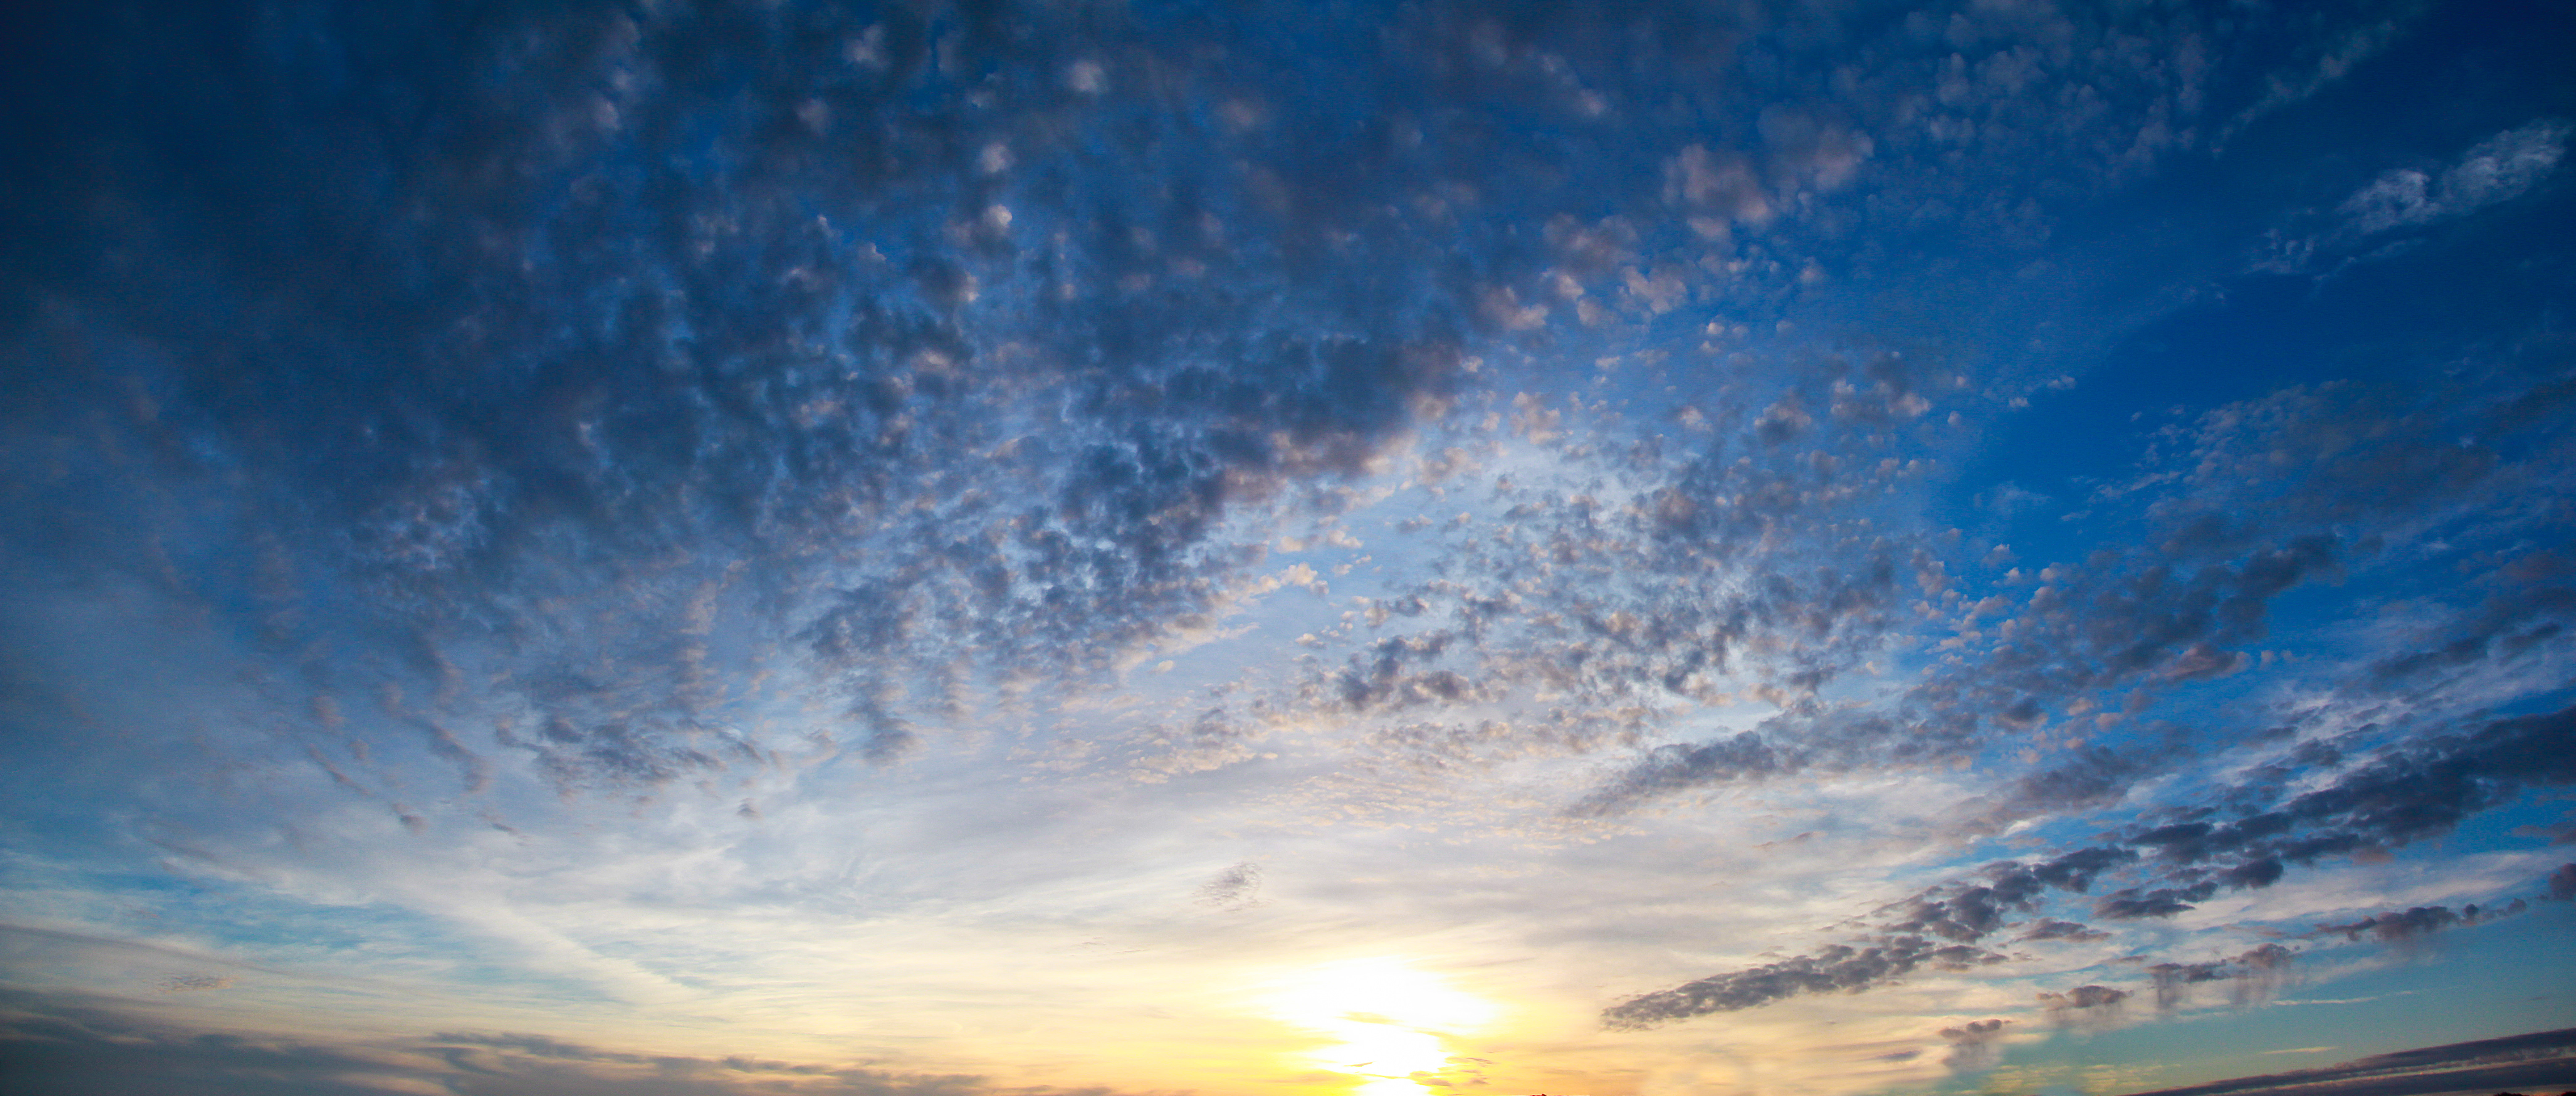 sunset high resolution stock photo large wallpaper blue gold clouds